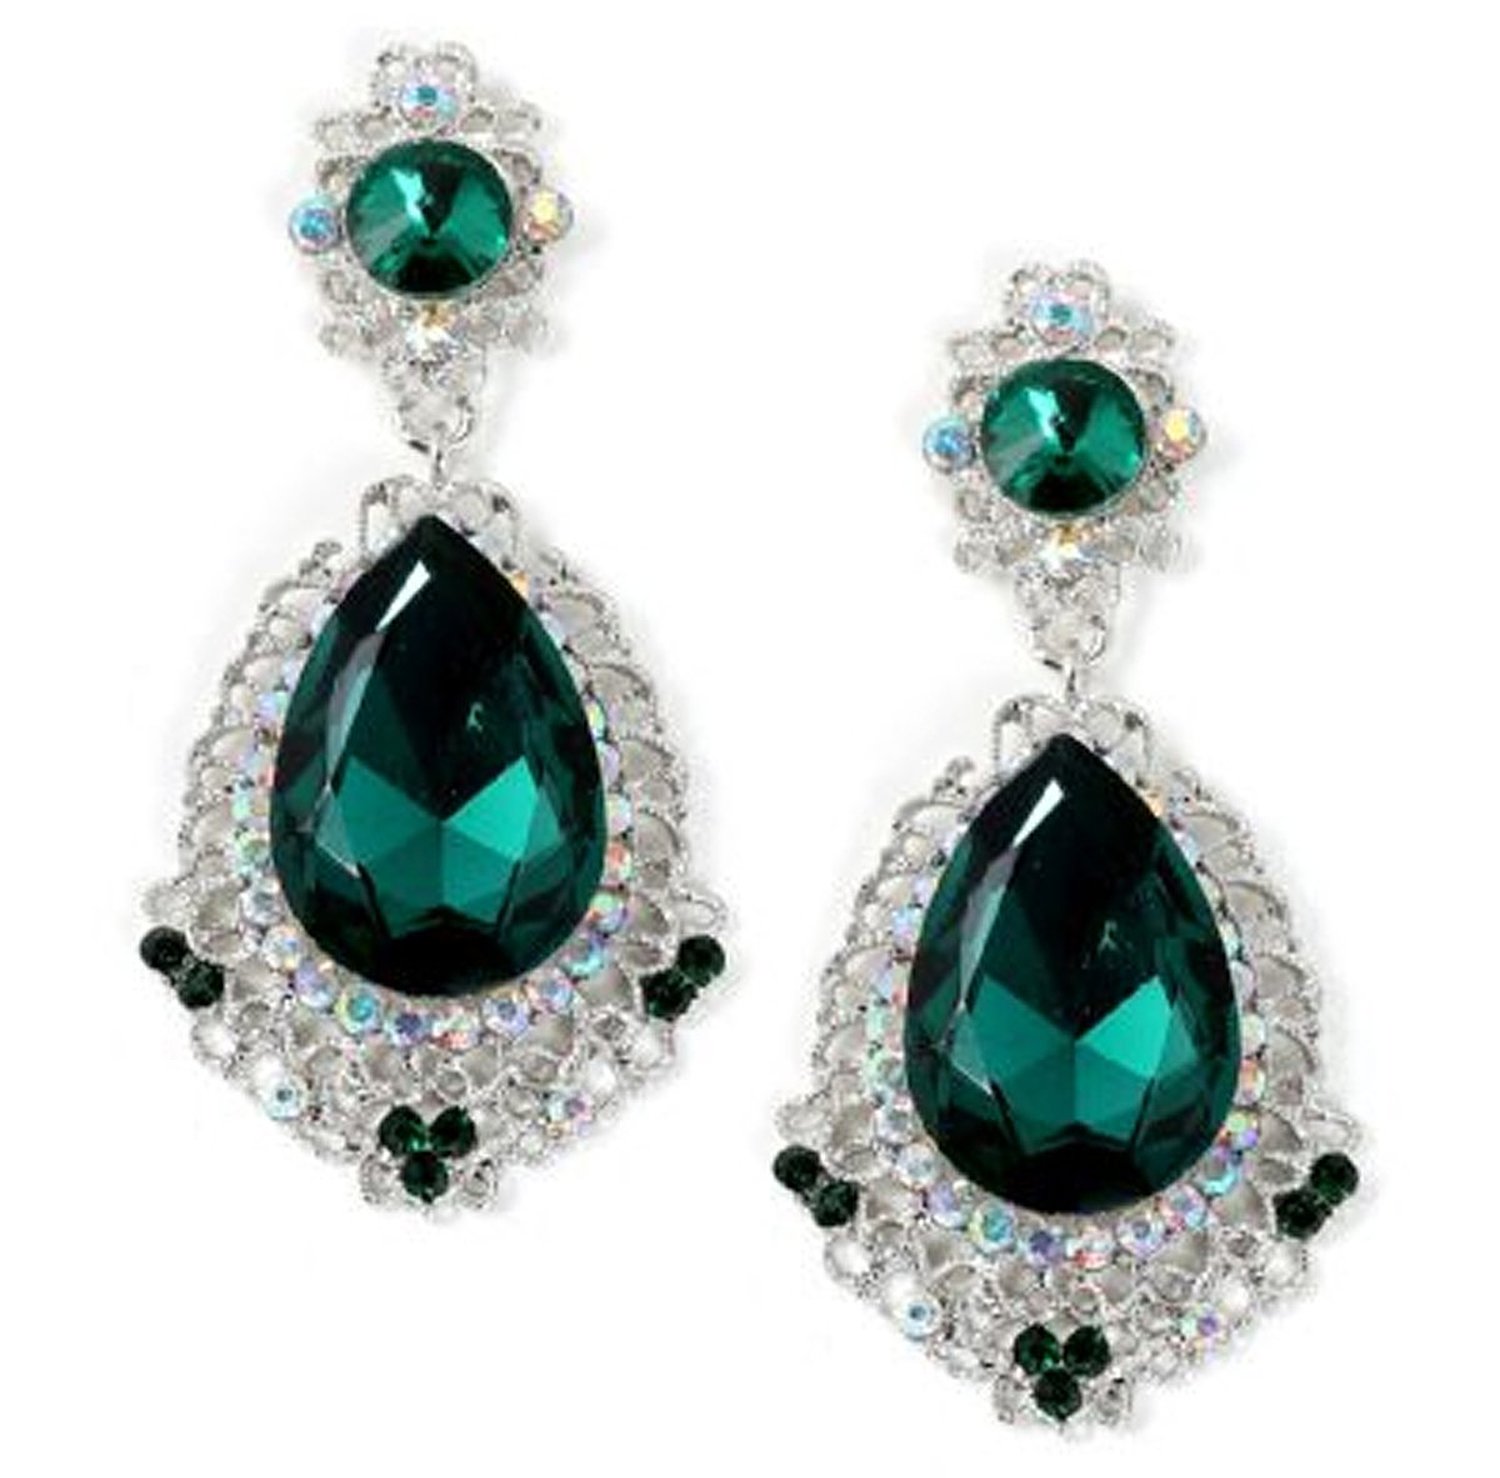 Large Emerald Green Crystal and Rhinestone Chandelier Earrings - Prom / Bridesmaid Jewelry